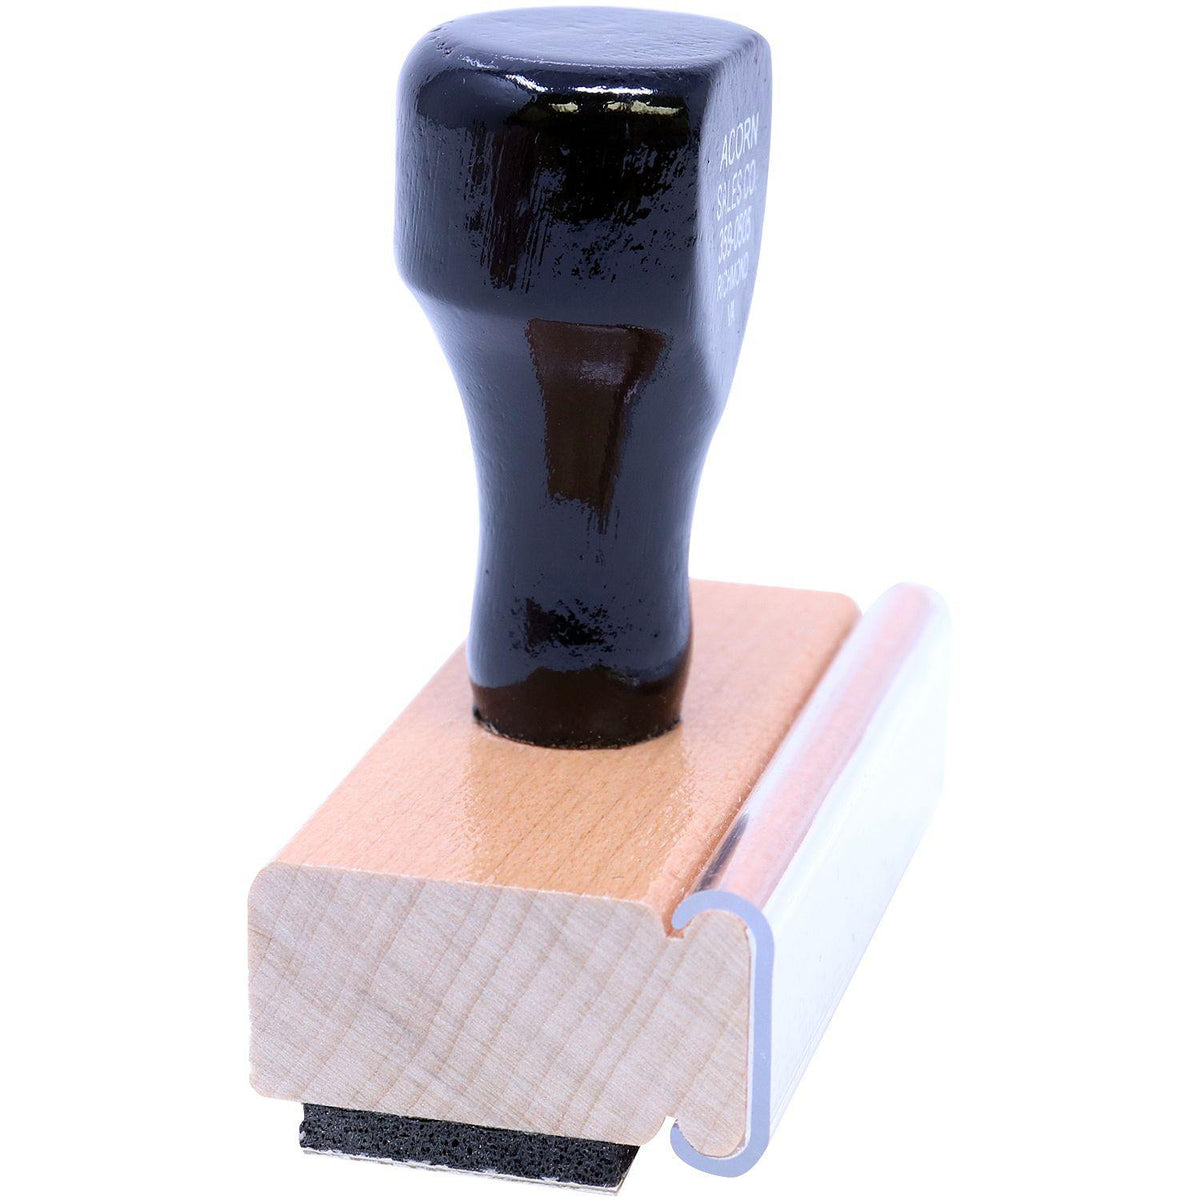 Side View of Large Please Sign and Return Rubber Stamp at an Angle